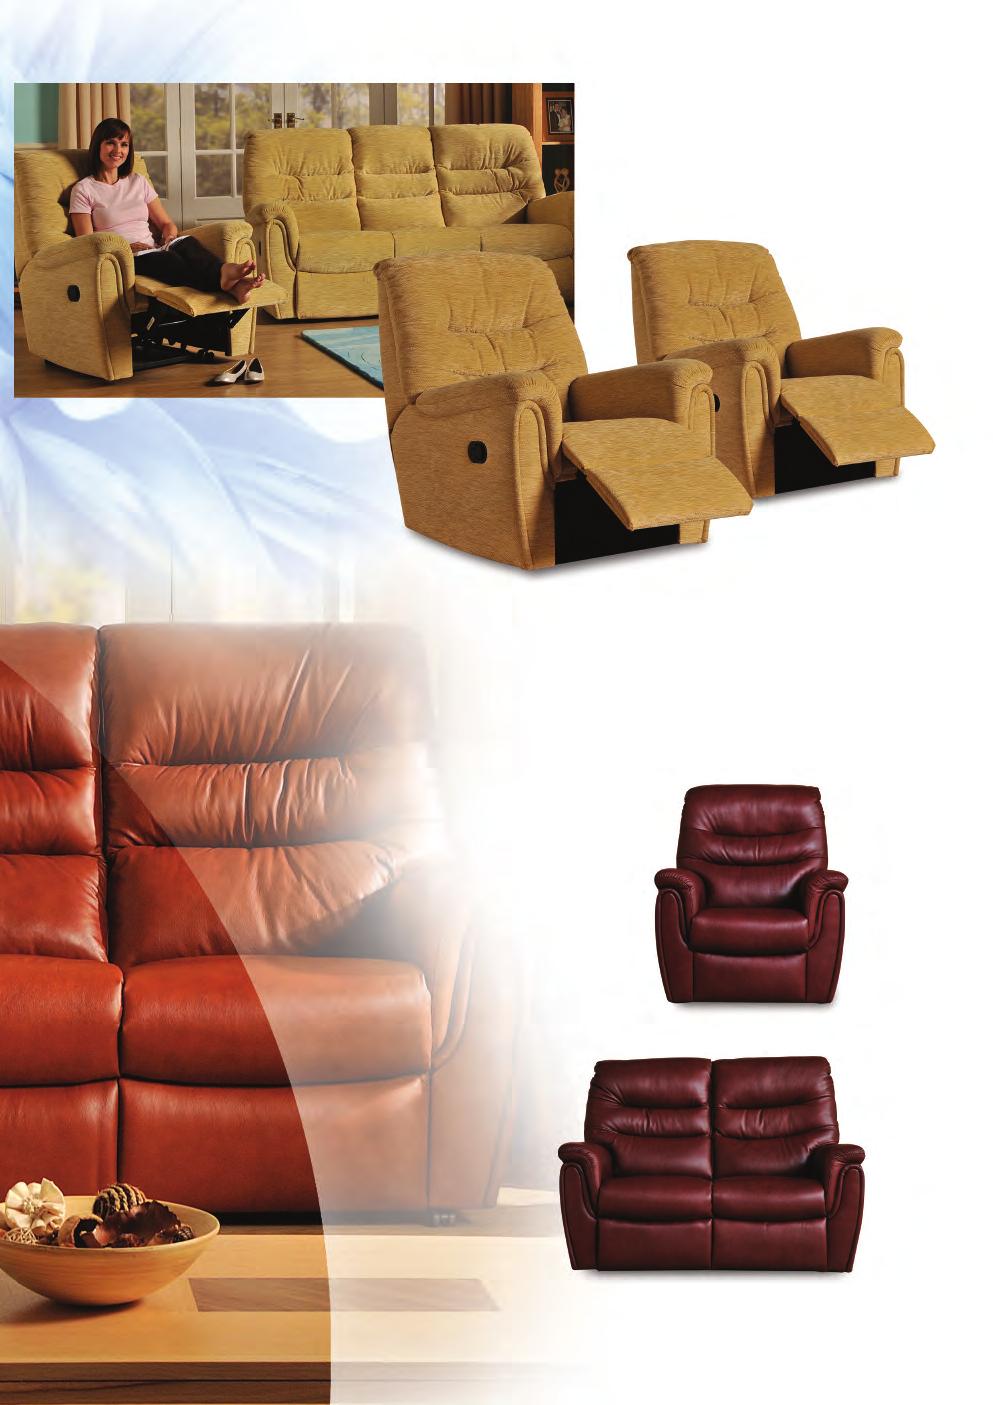 A wider choice of comfort Recliners are available in two sizes, and in a choice of hard wearing fabric and luxury